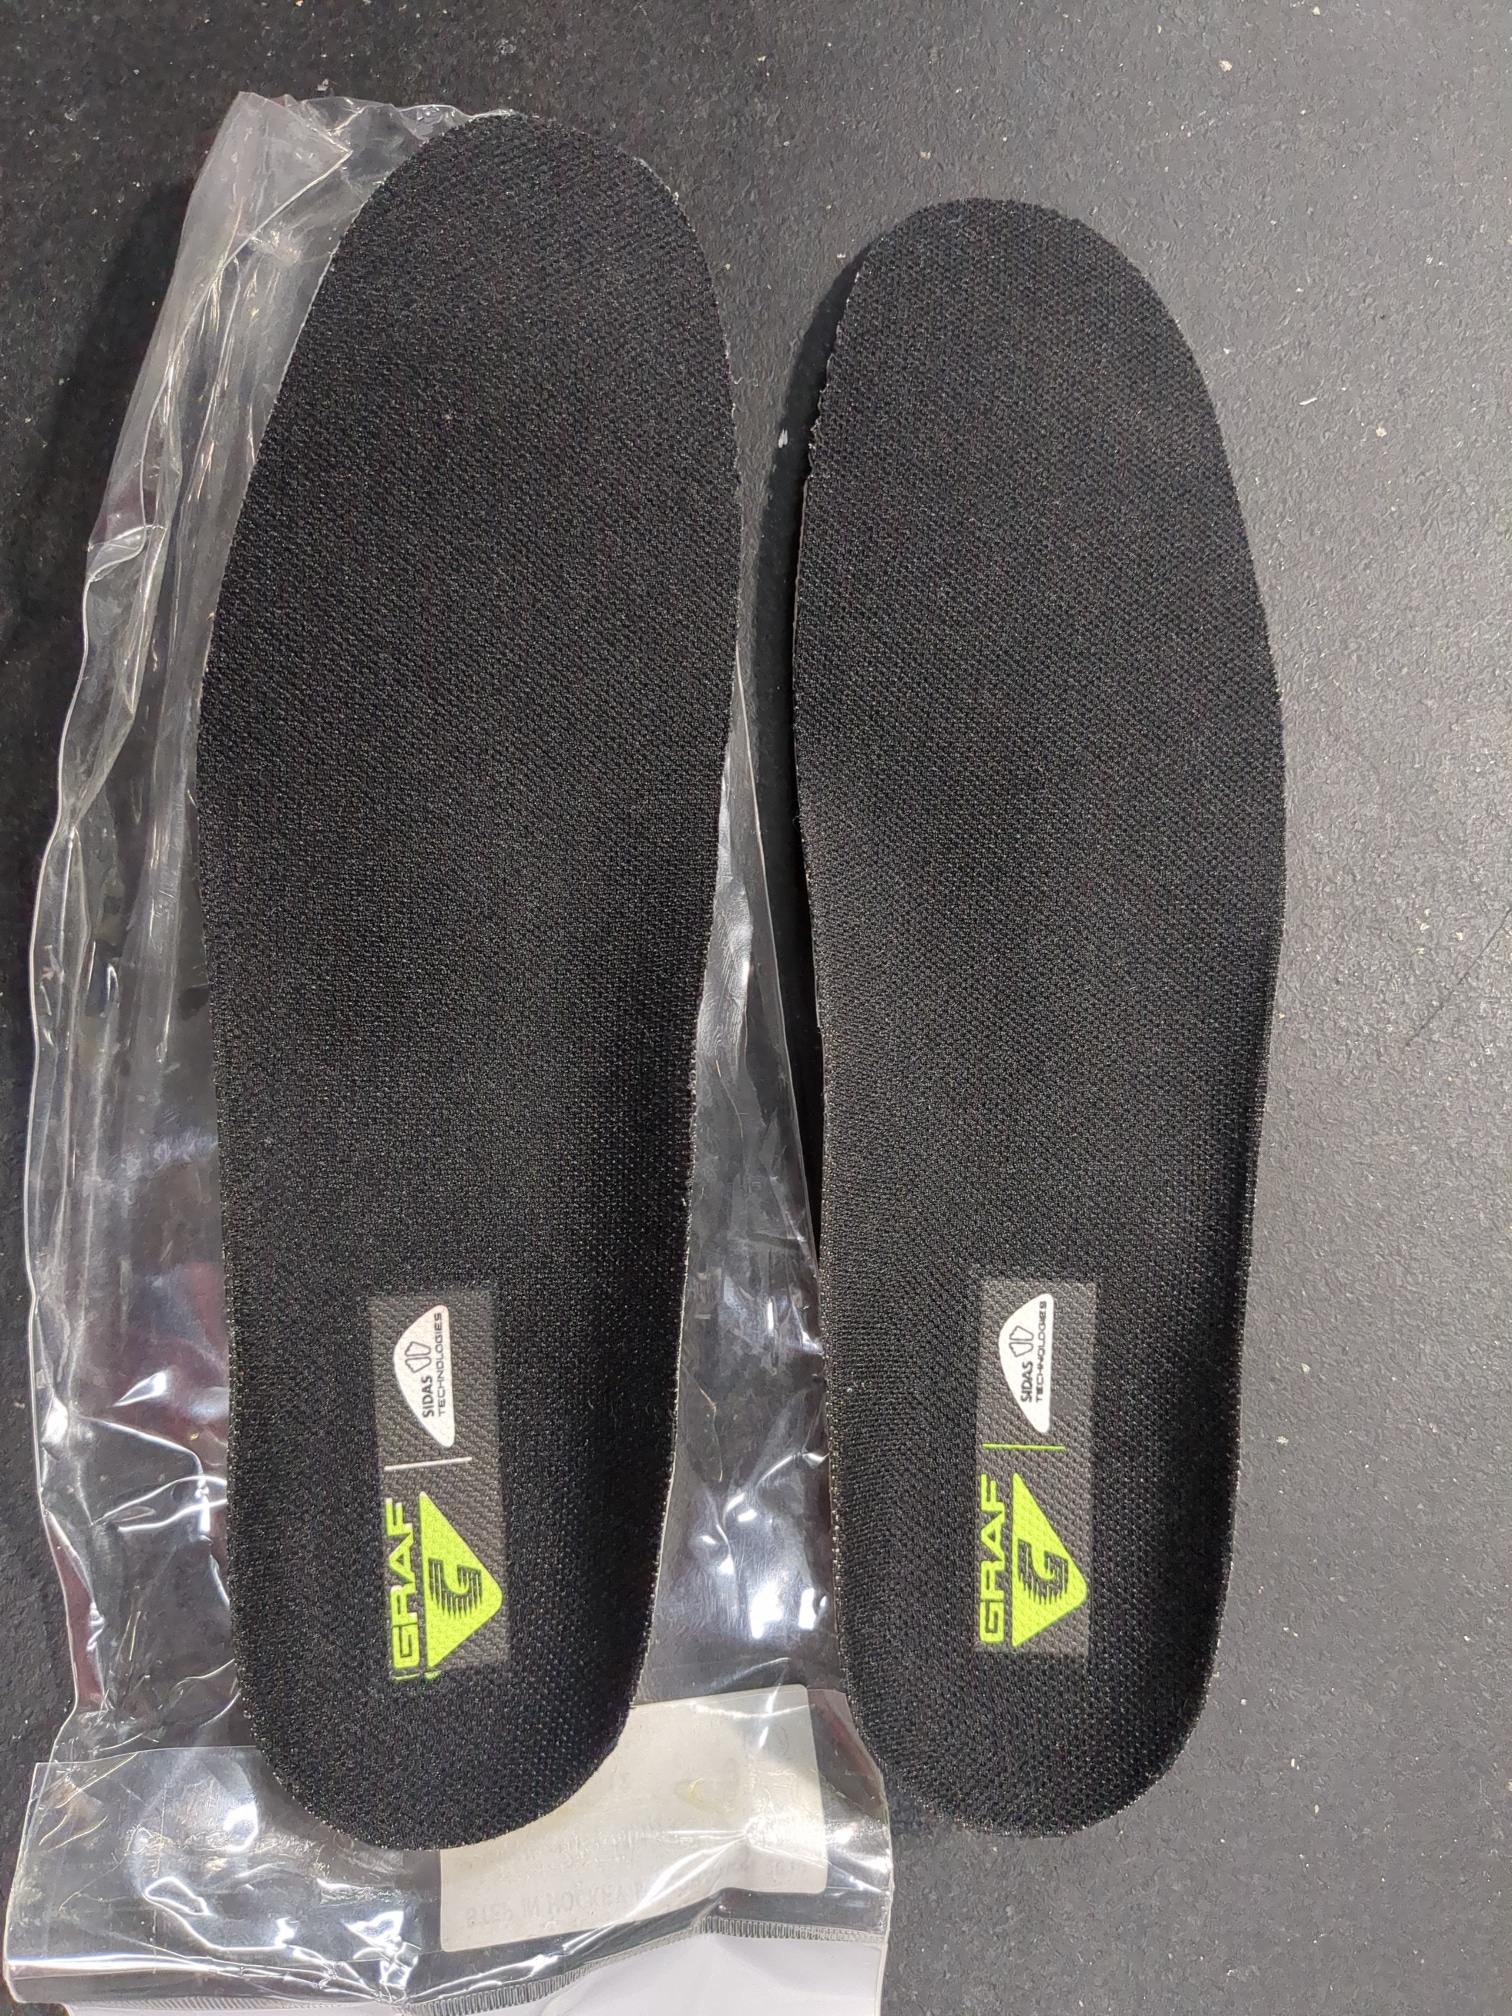 New Graf STEP IN SIDAS Footbed Insoles XL